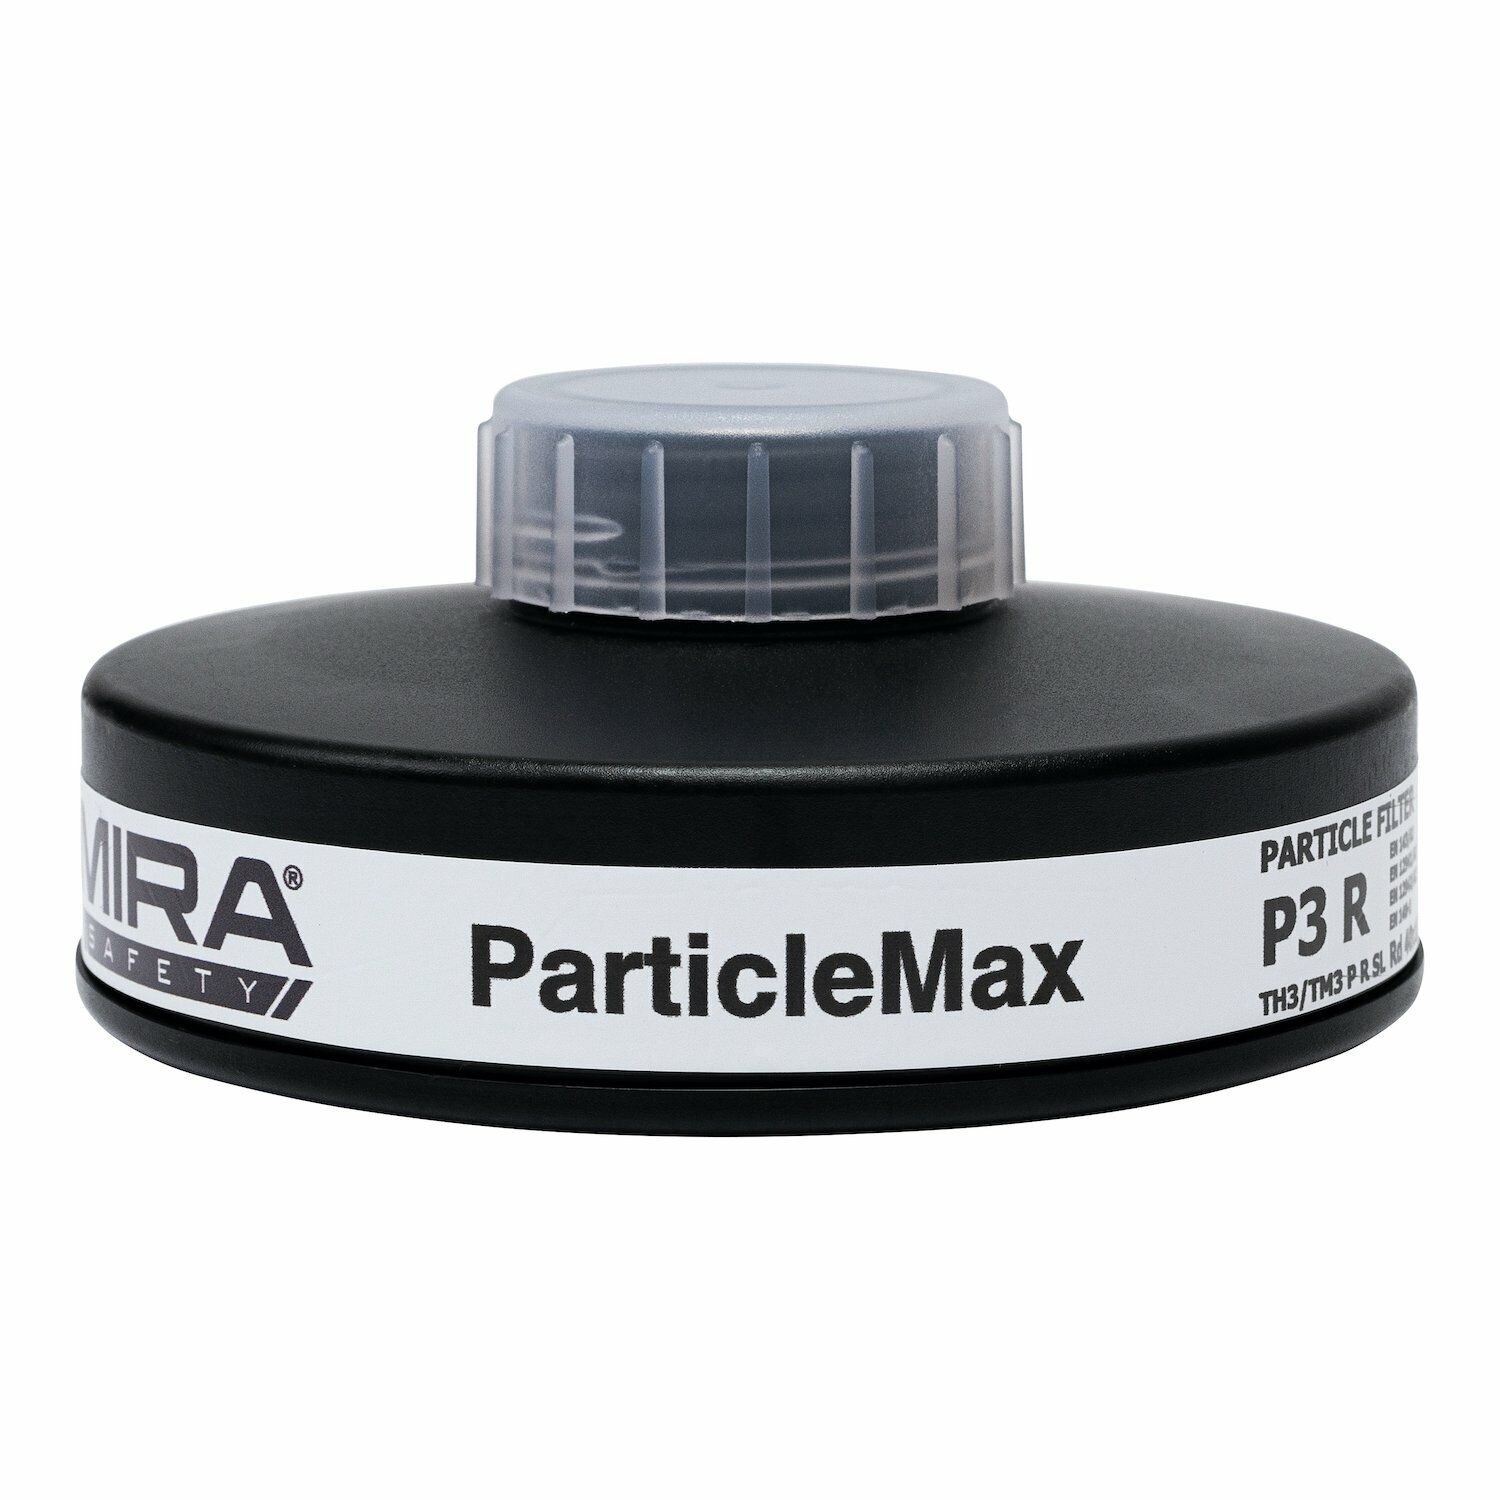 MIRA Safety Particlemax P3 Virus & Bacteria 40mm Filter - New 20 Year Shelf Life